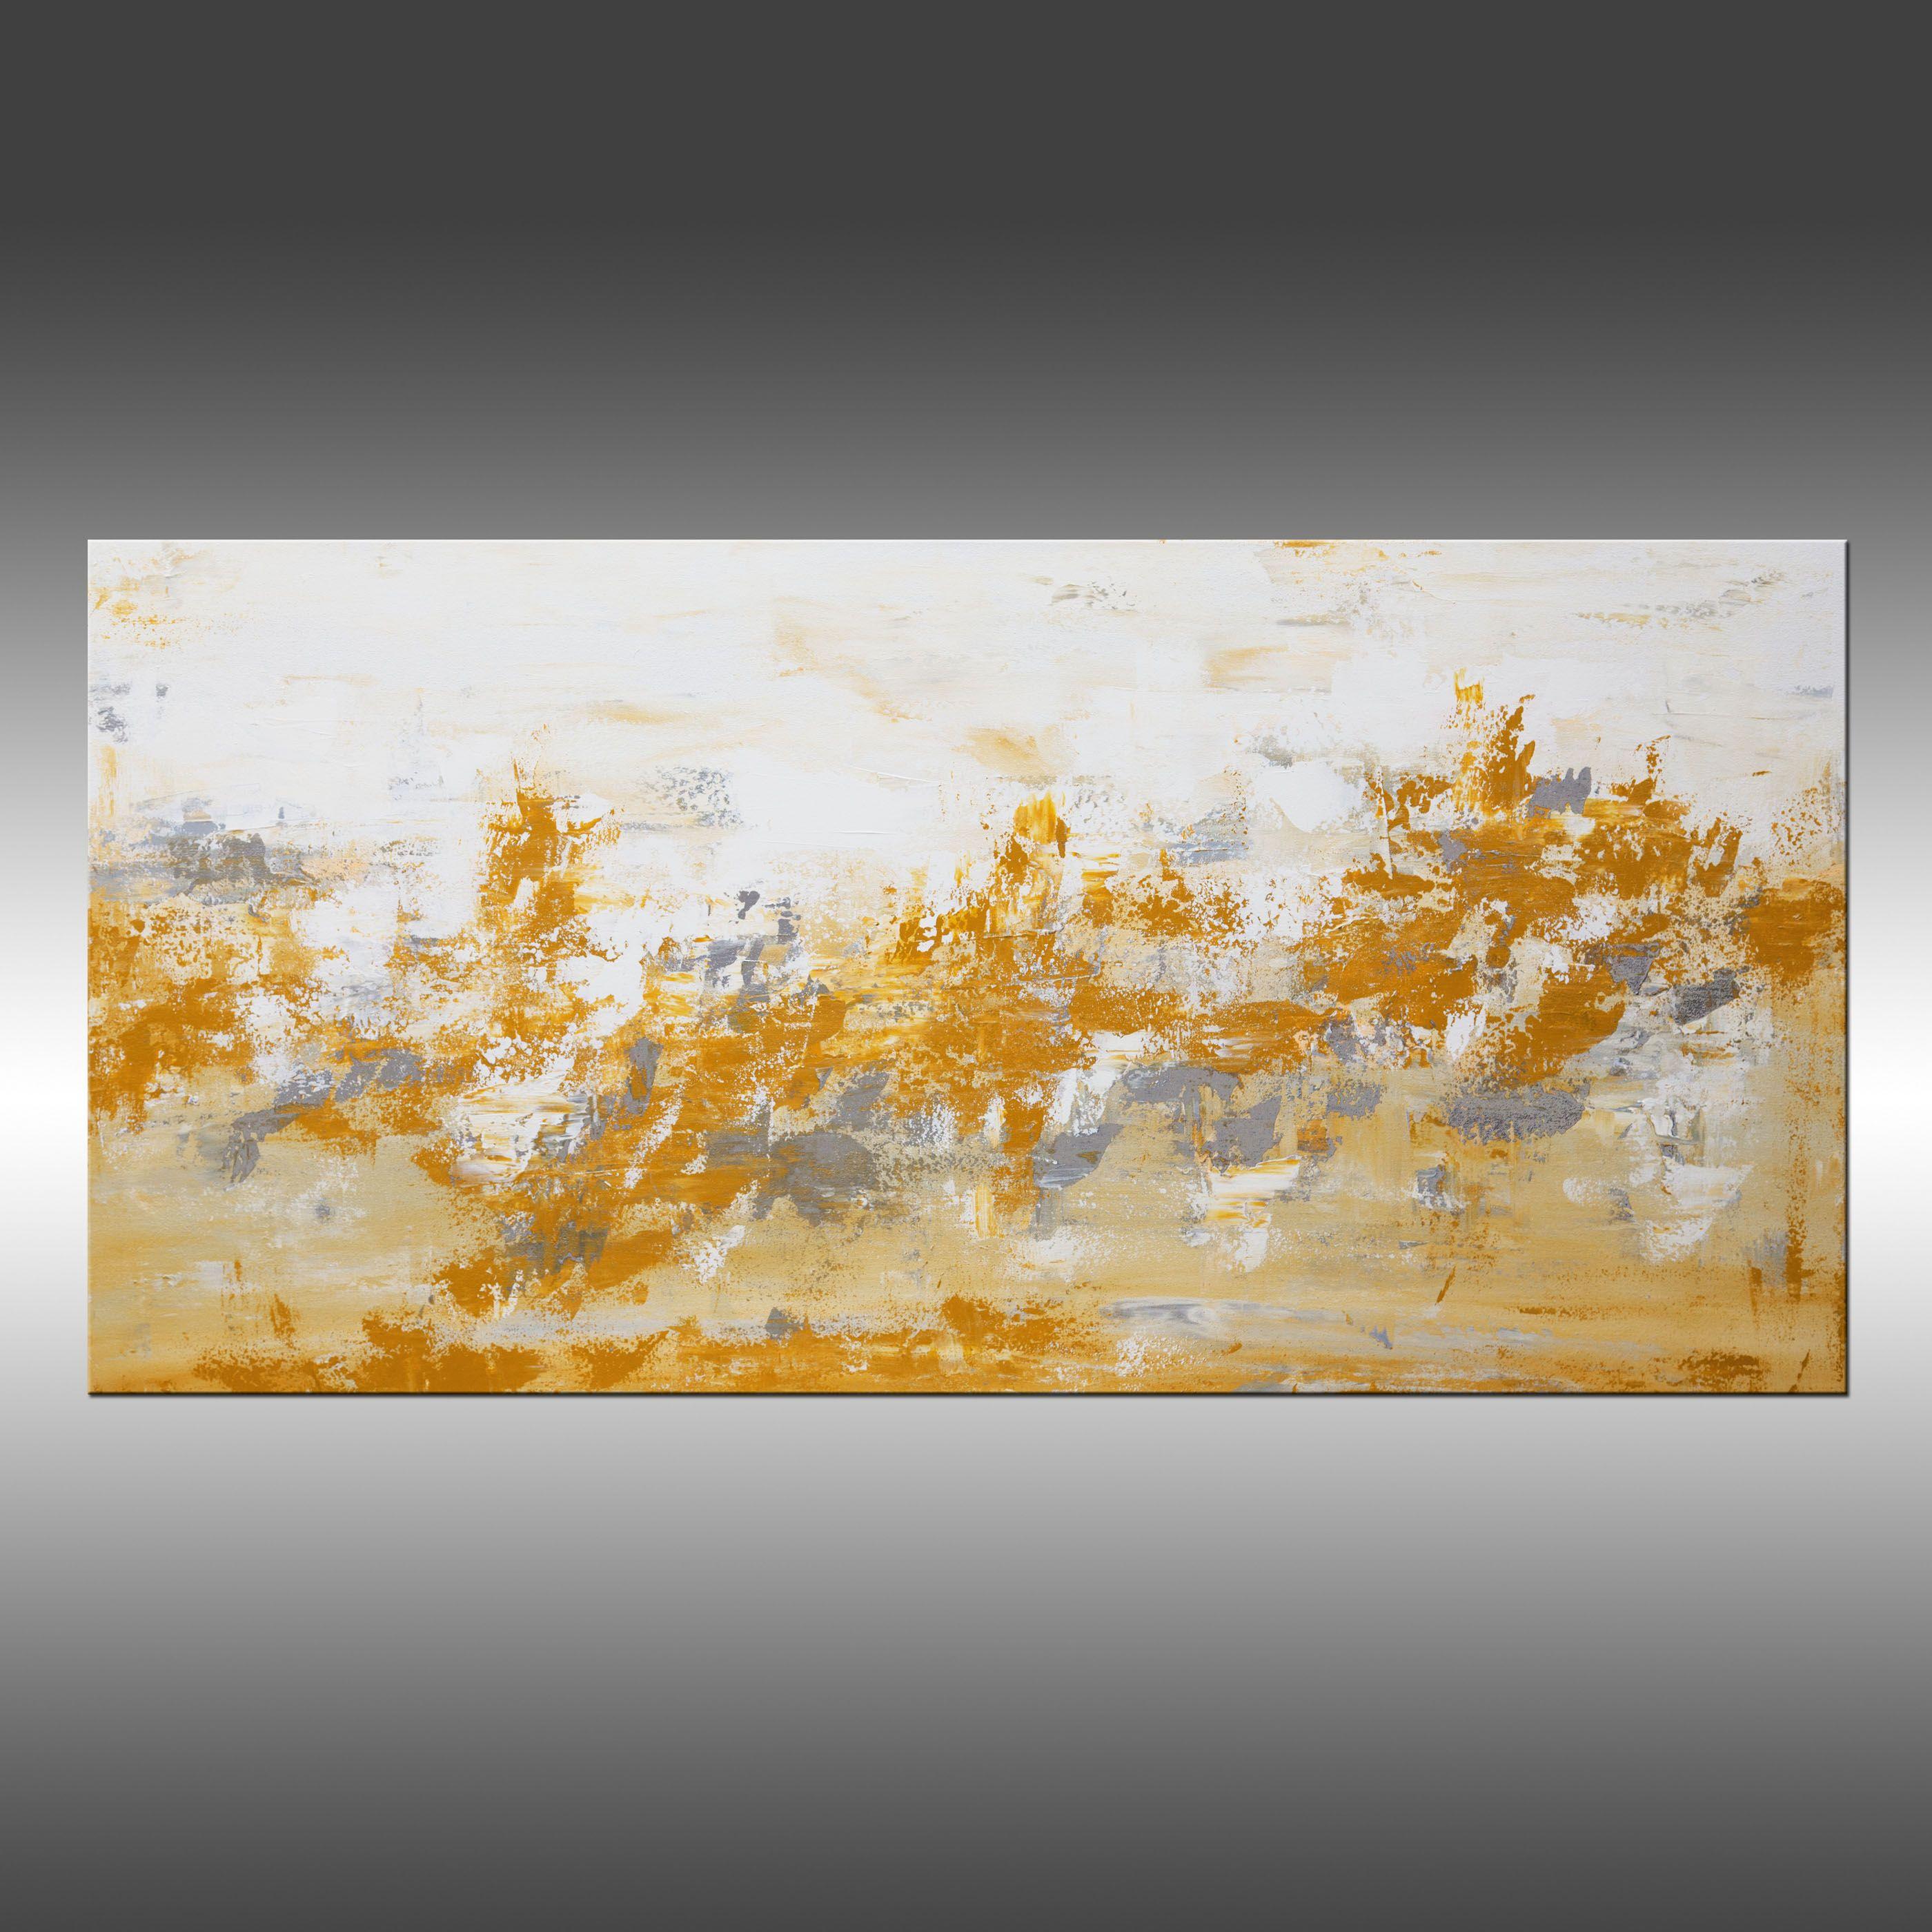 Rising Spirit 4 is an original painting, created with acrylic paint on gallery-wrapped canvas. It has a width of 48 inches and a height of 24 inches with a depth of 1.5 inches (24x48x1.5).     The colors used in the painting are white, taupe, golden